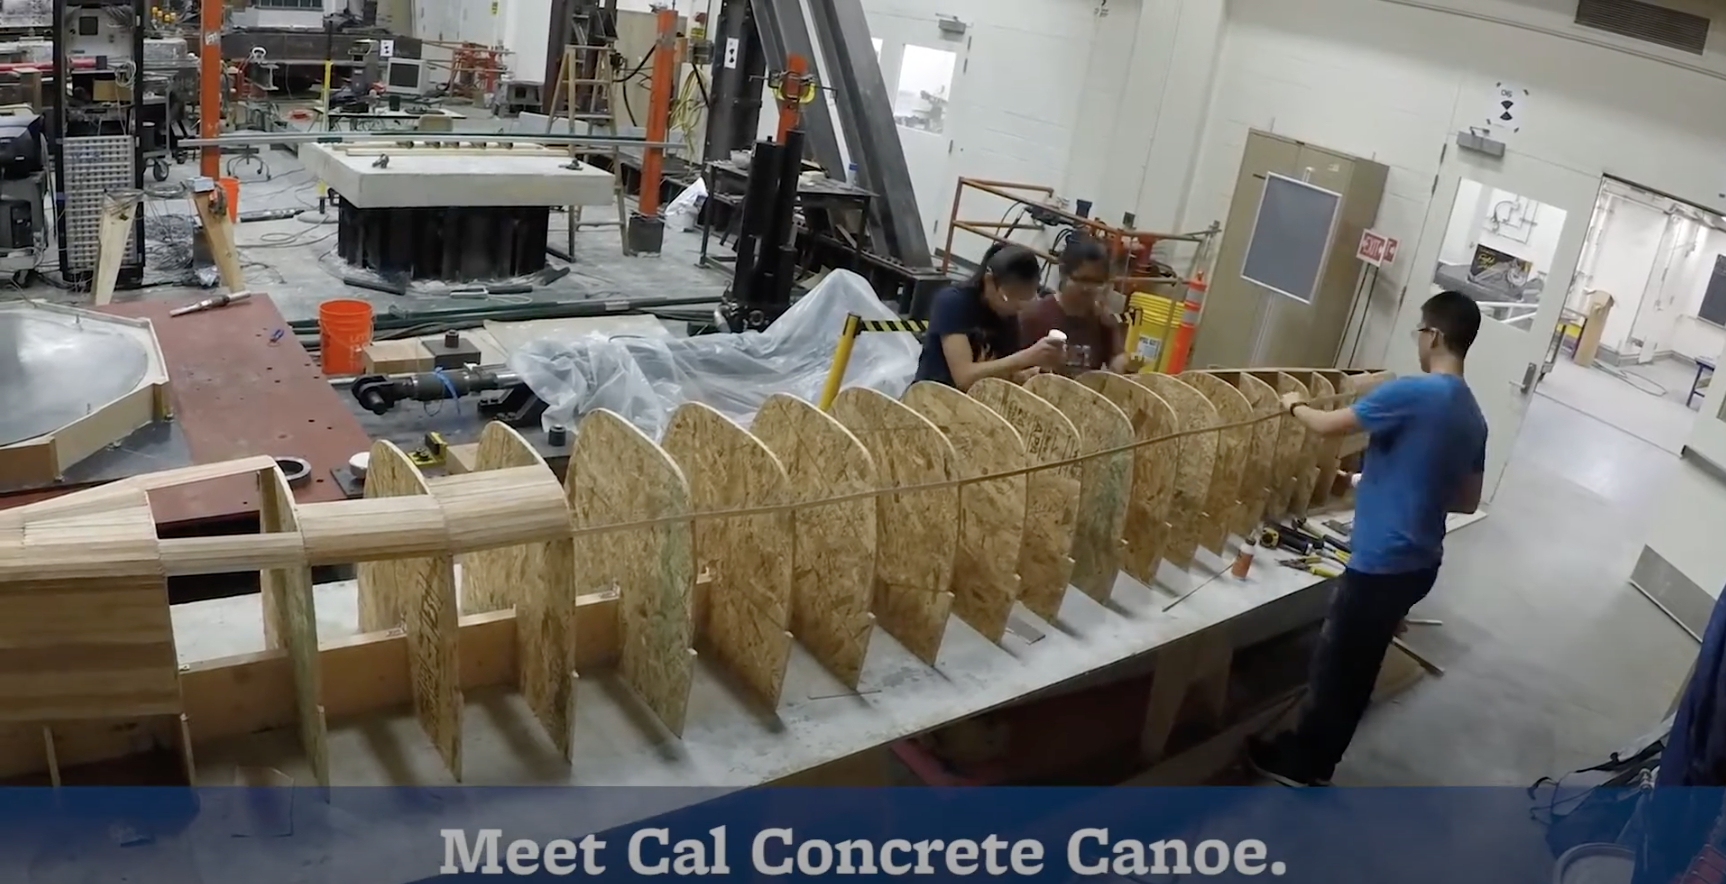 Screenshot from the Girls in Engineering 2020: Concrete Canoes video